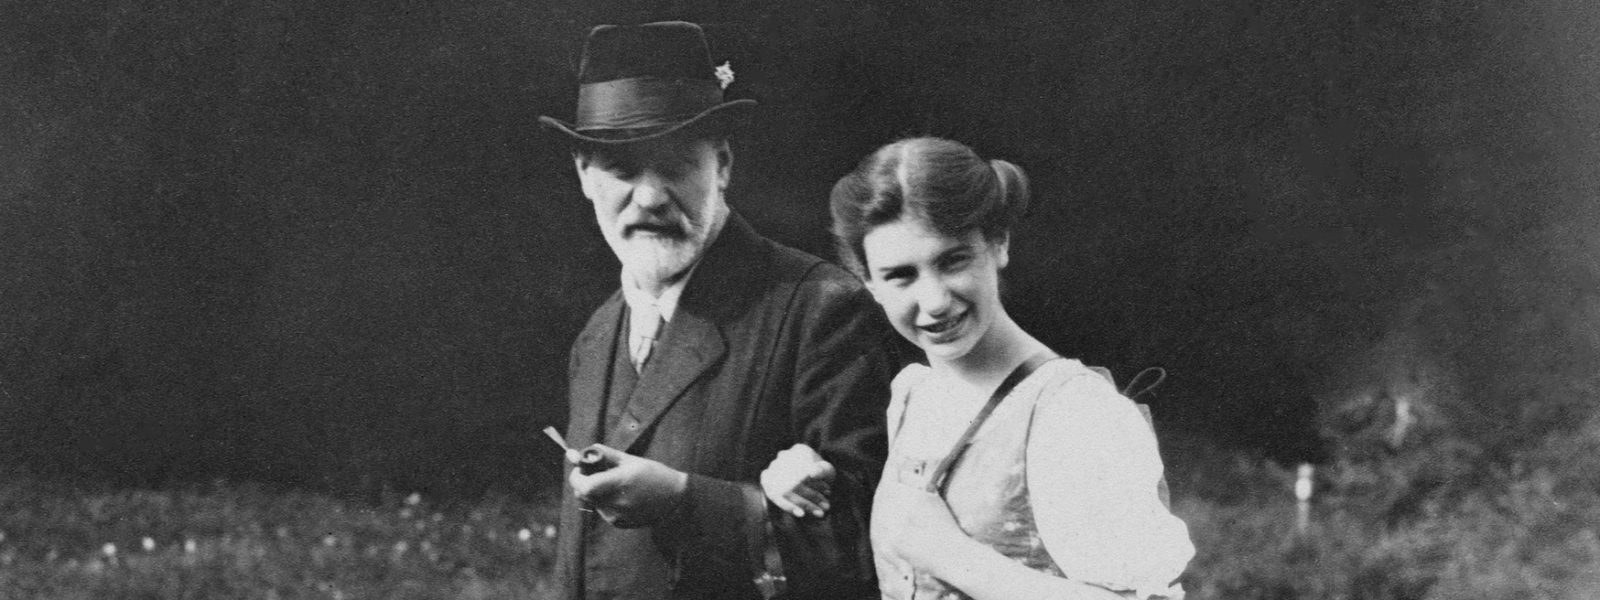 Black and white photograph of Sigmund and Anna Freud walking arm in arm and looking at the camera